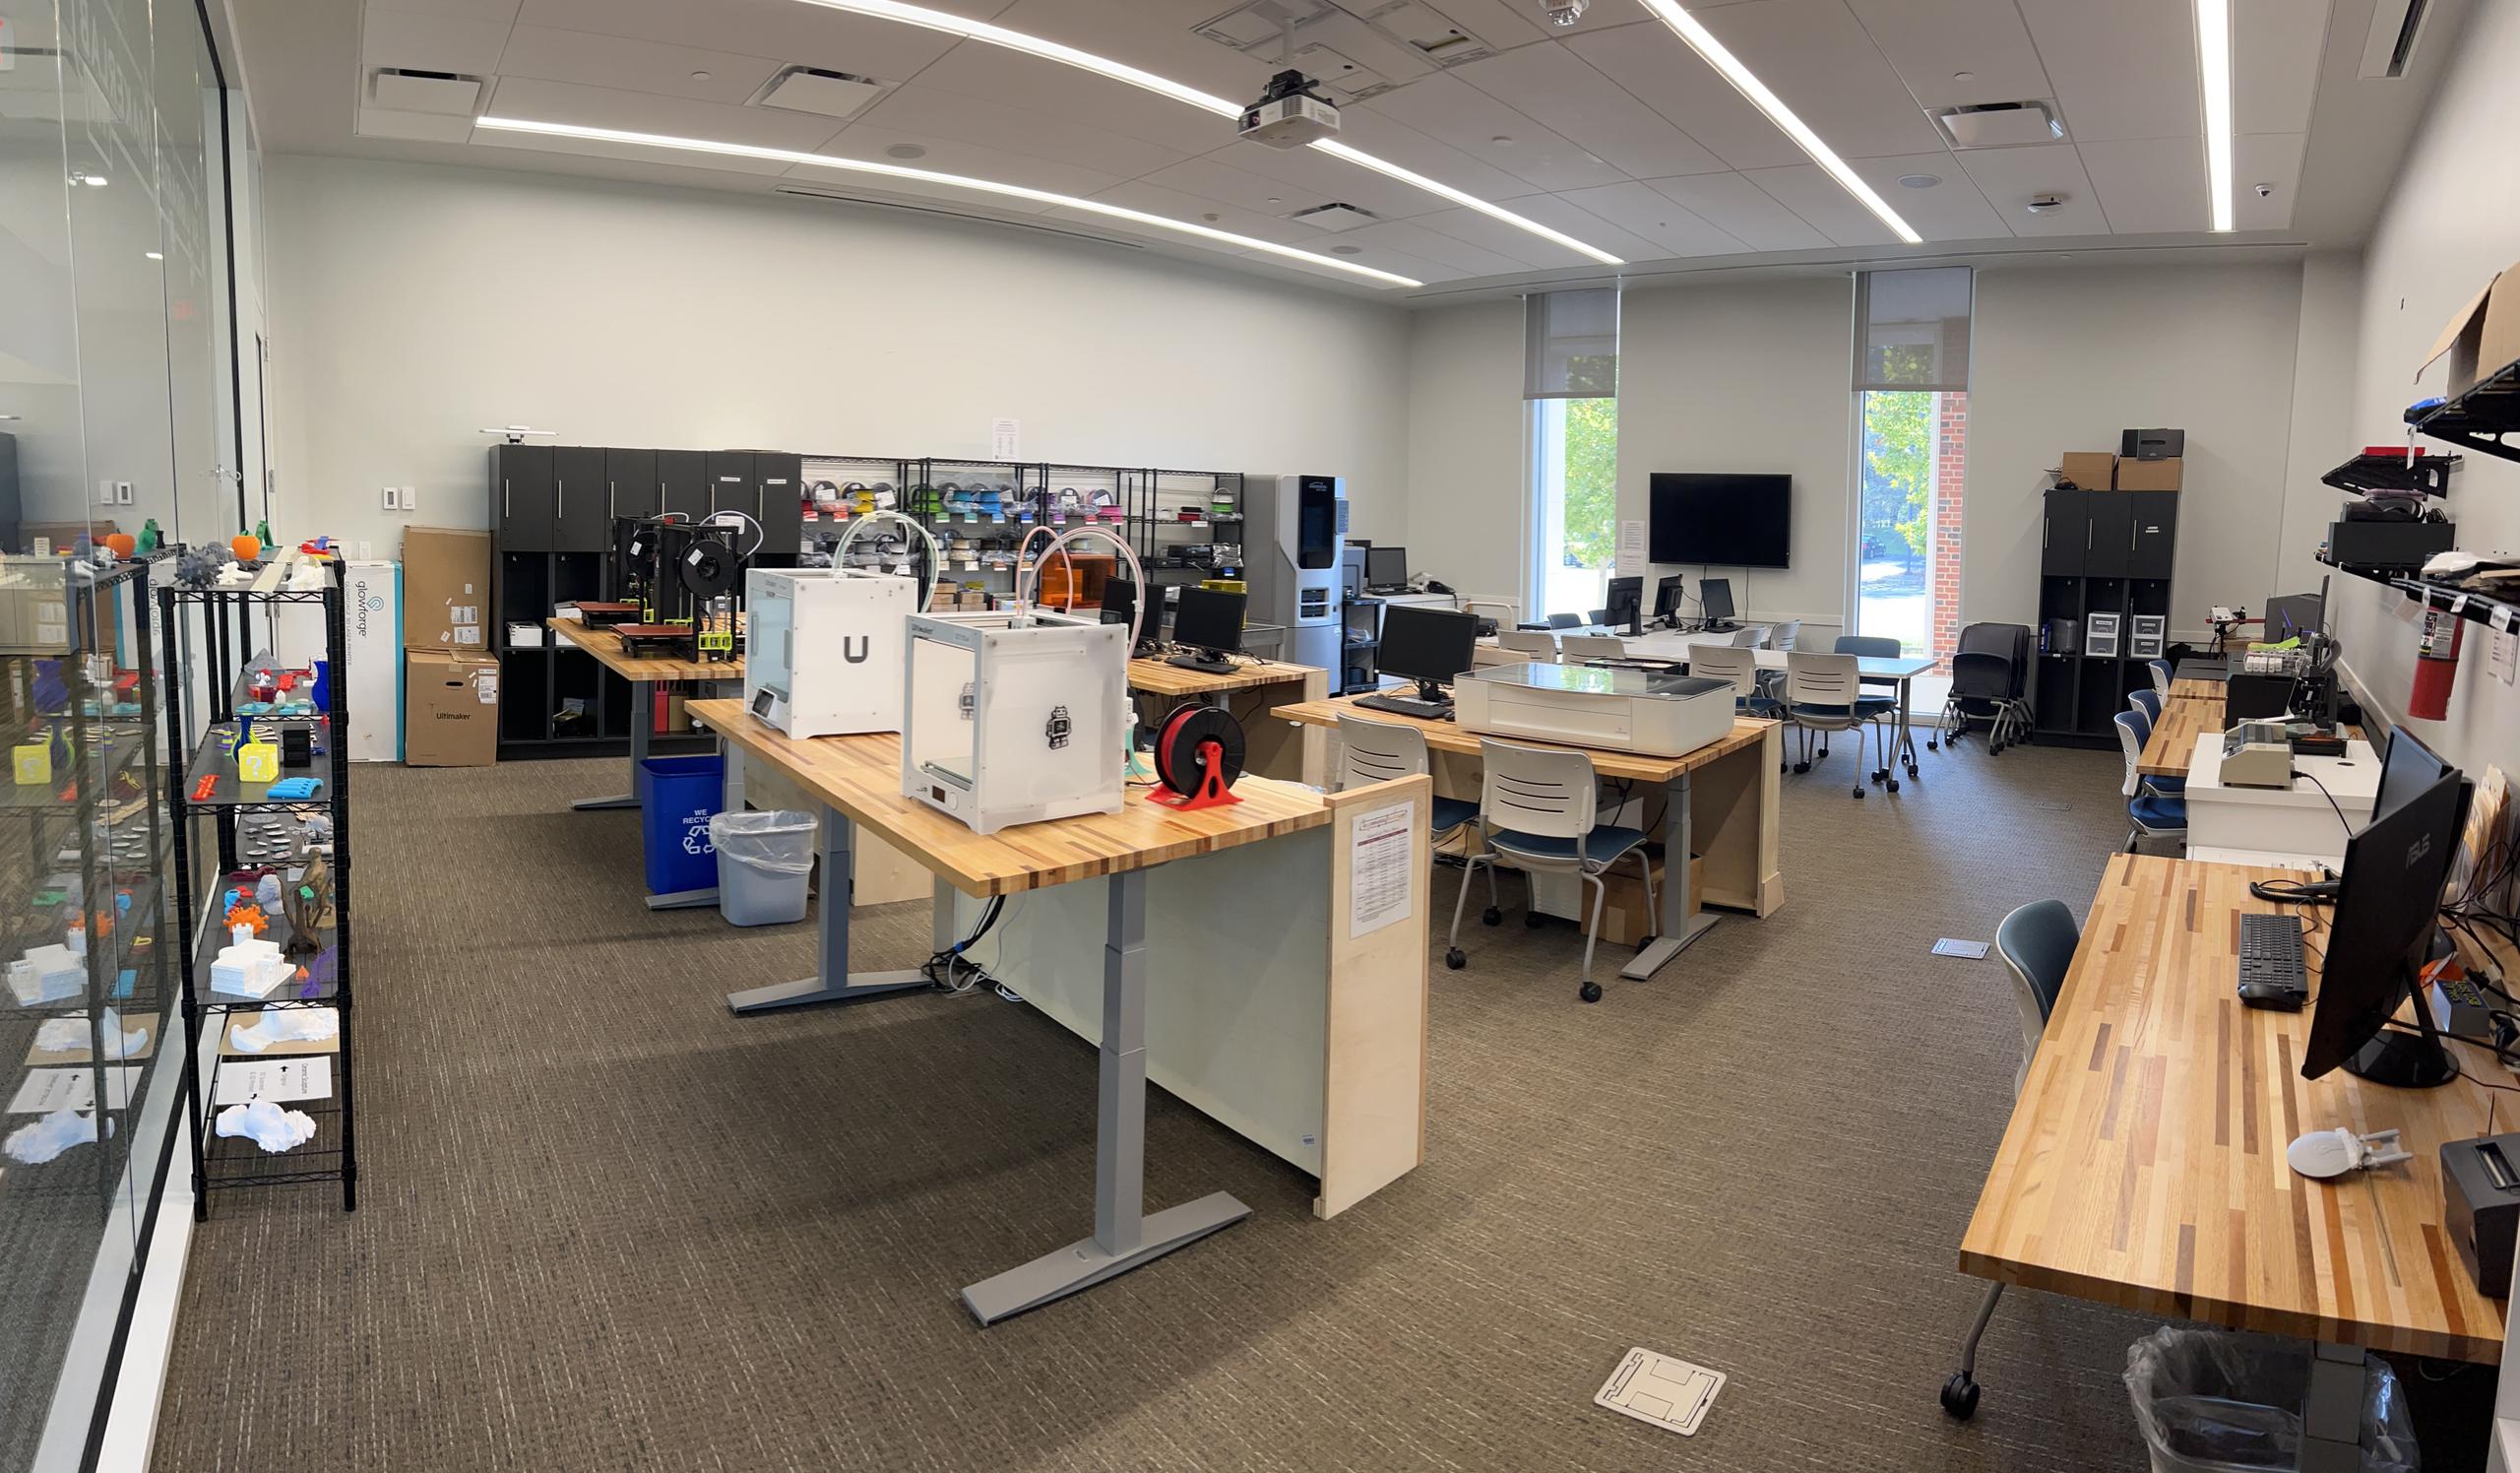 The MakerLab room showing tables with 3D printers on them and various other technologies.